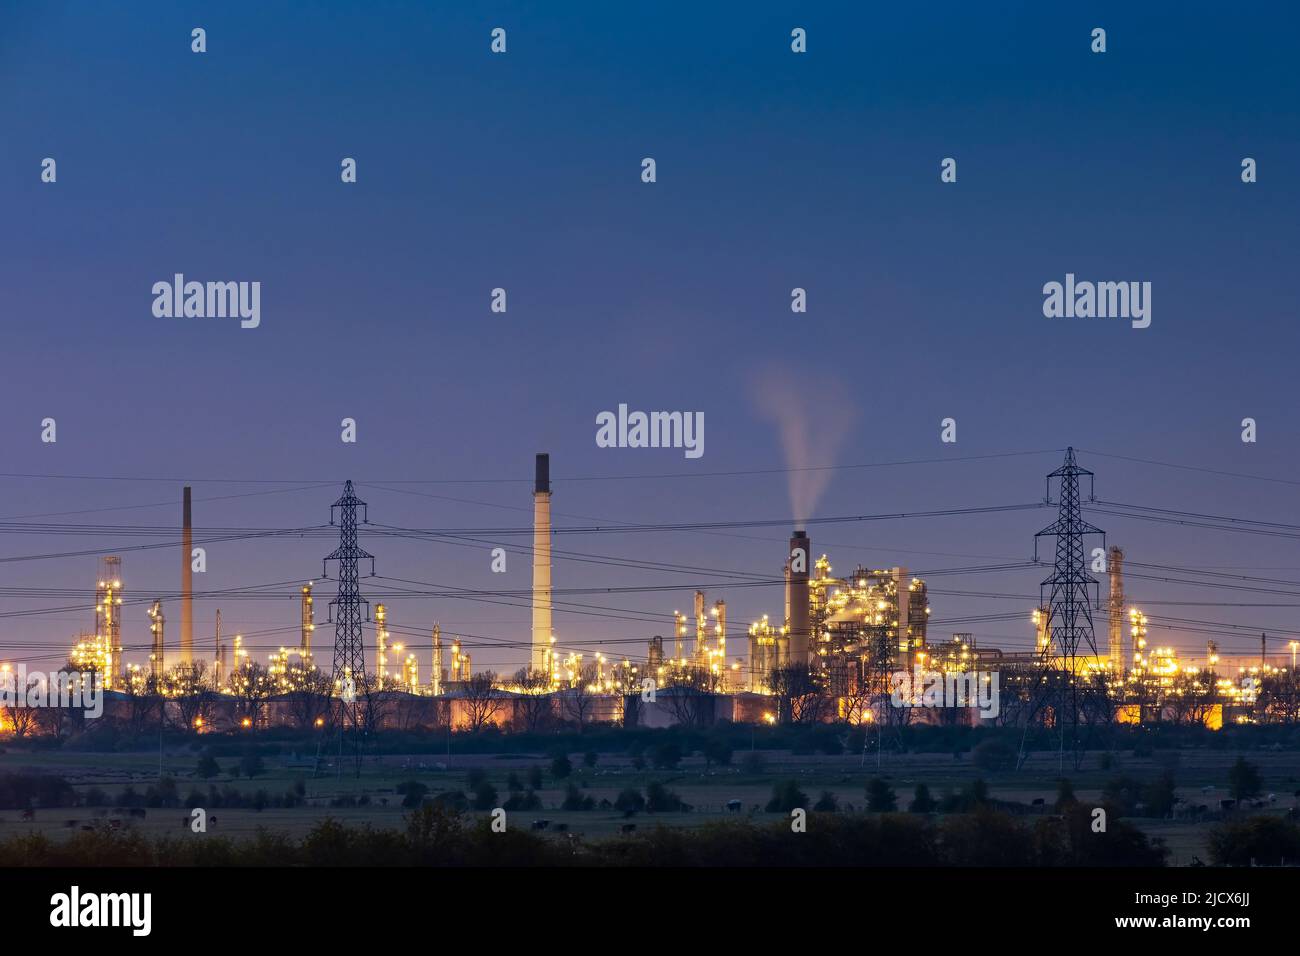 Stanlow Oil Refinery at night, near Ellesmere Port, Cheshire, England, United Kingdom, Europe Stock Photo